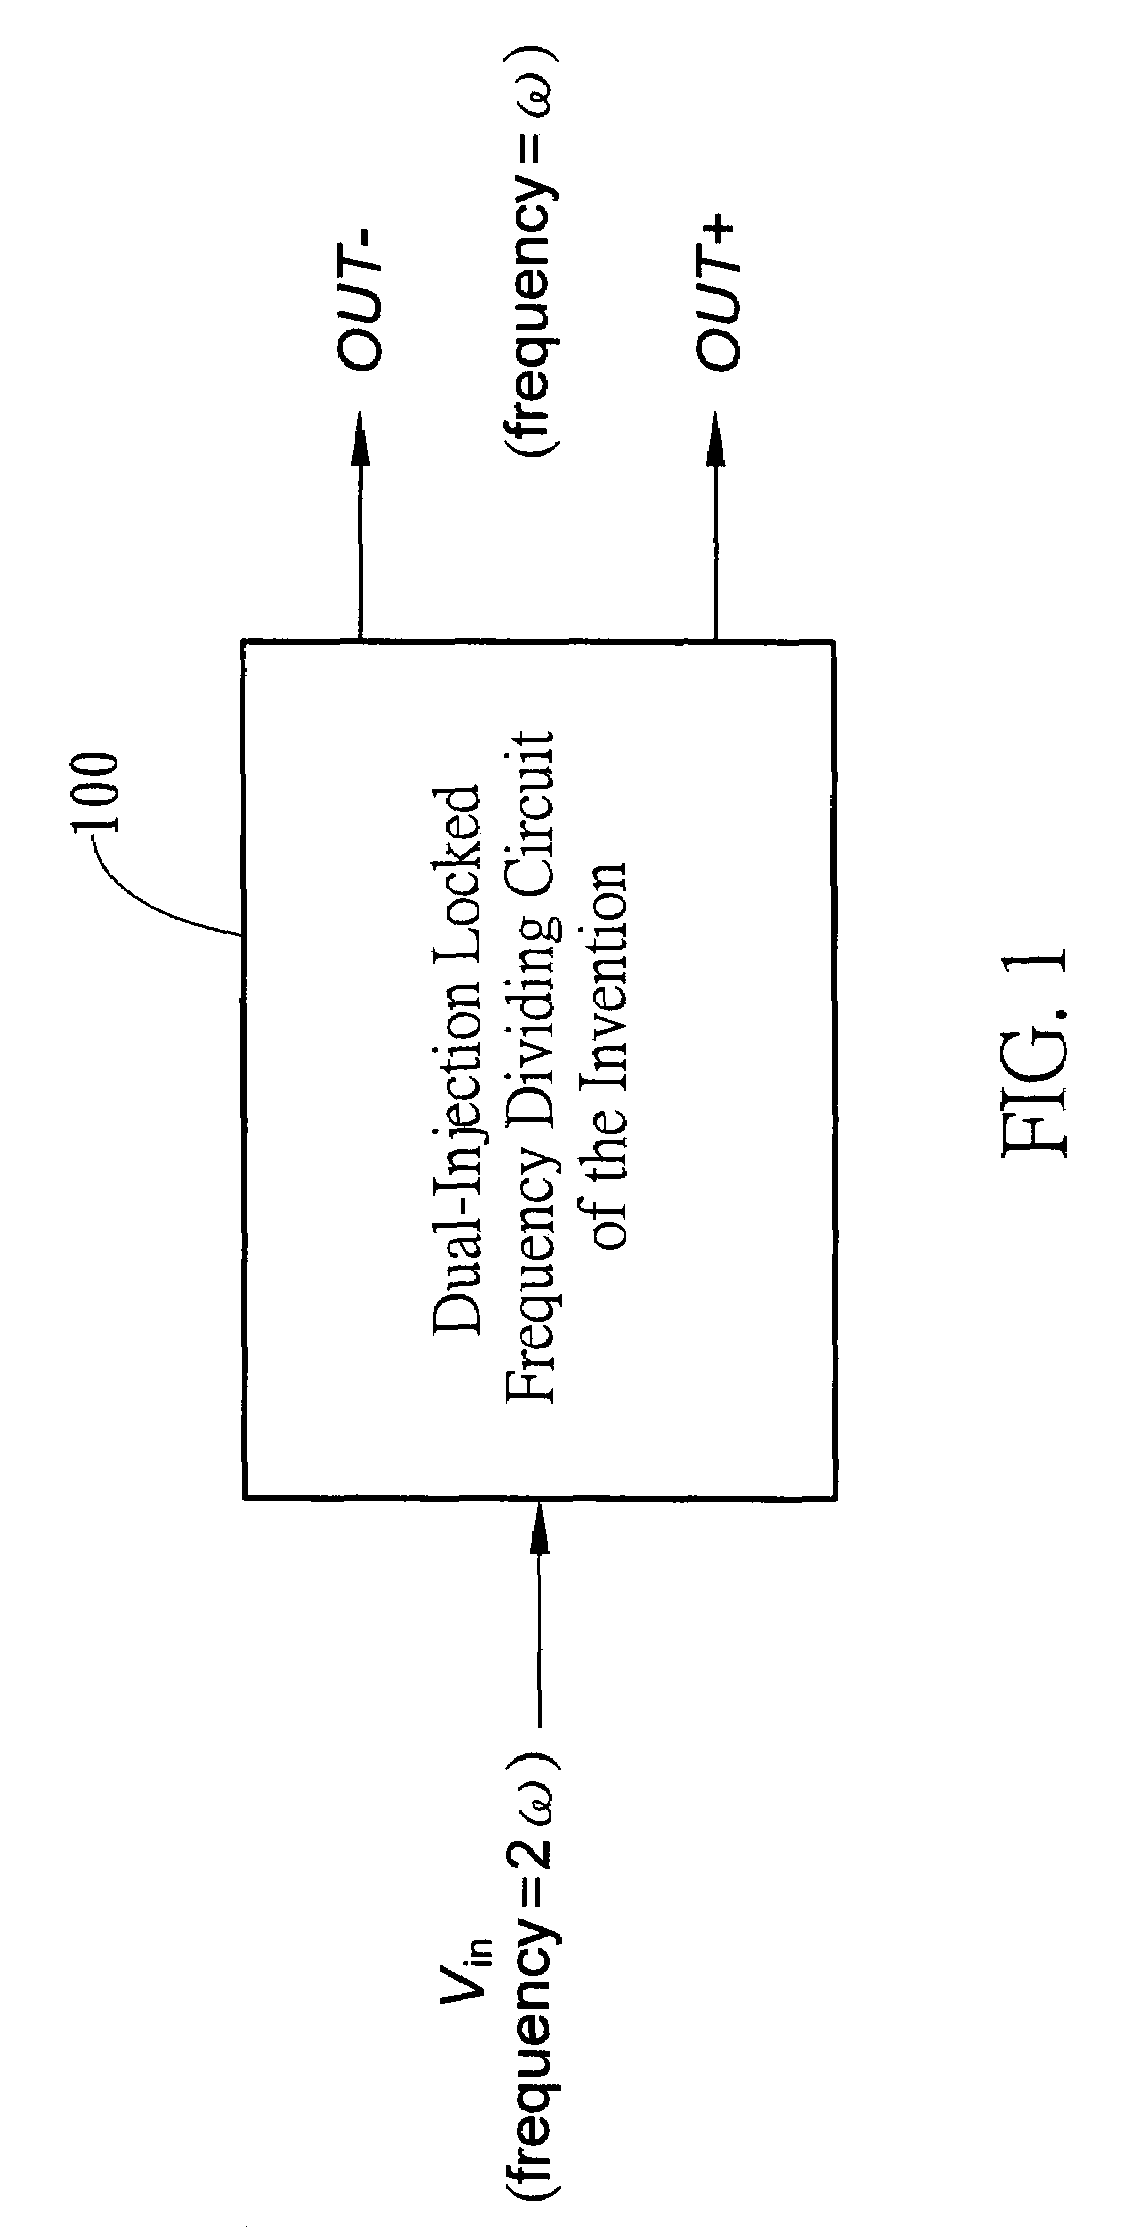 Dual-injection locked frequency dividing circuit